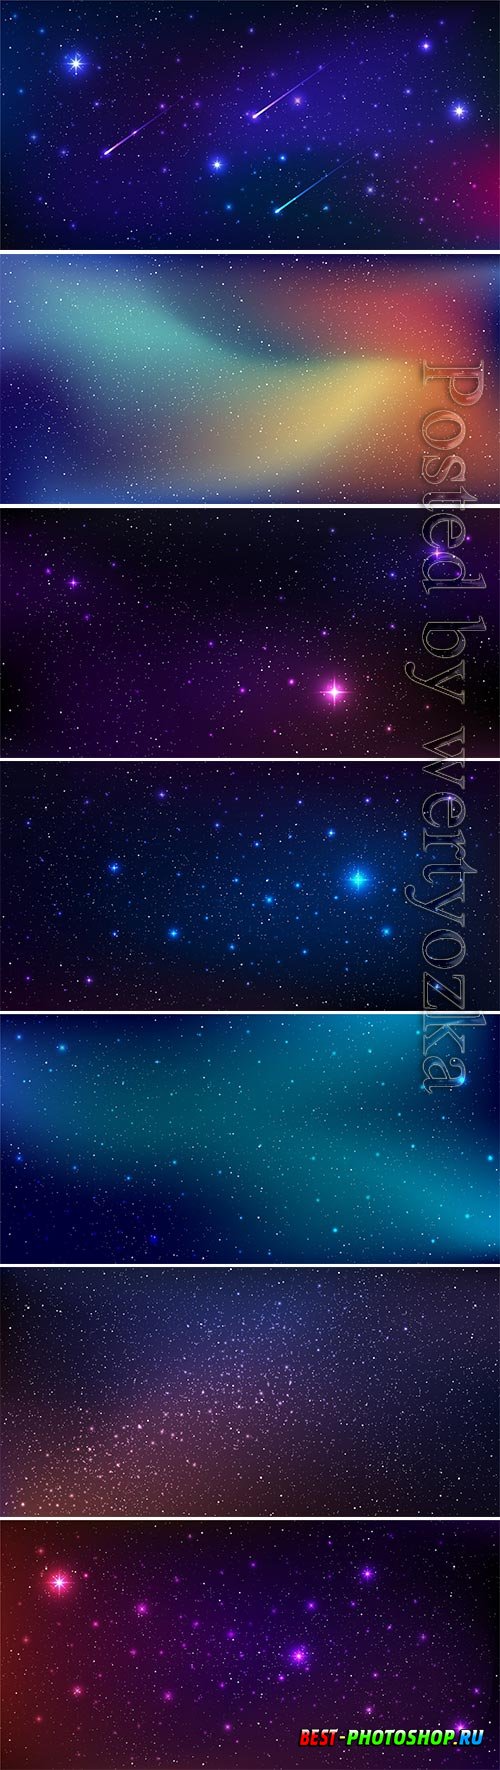 Galaxy illustration with stardust and bright shining stars